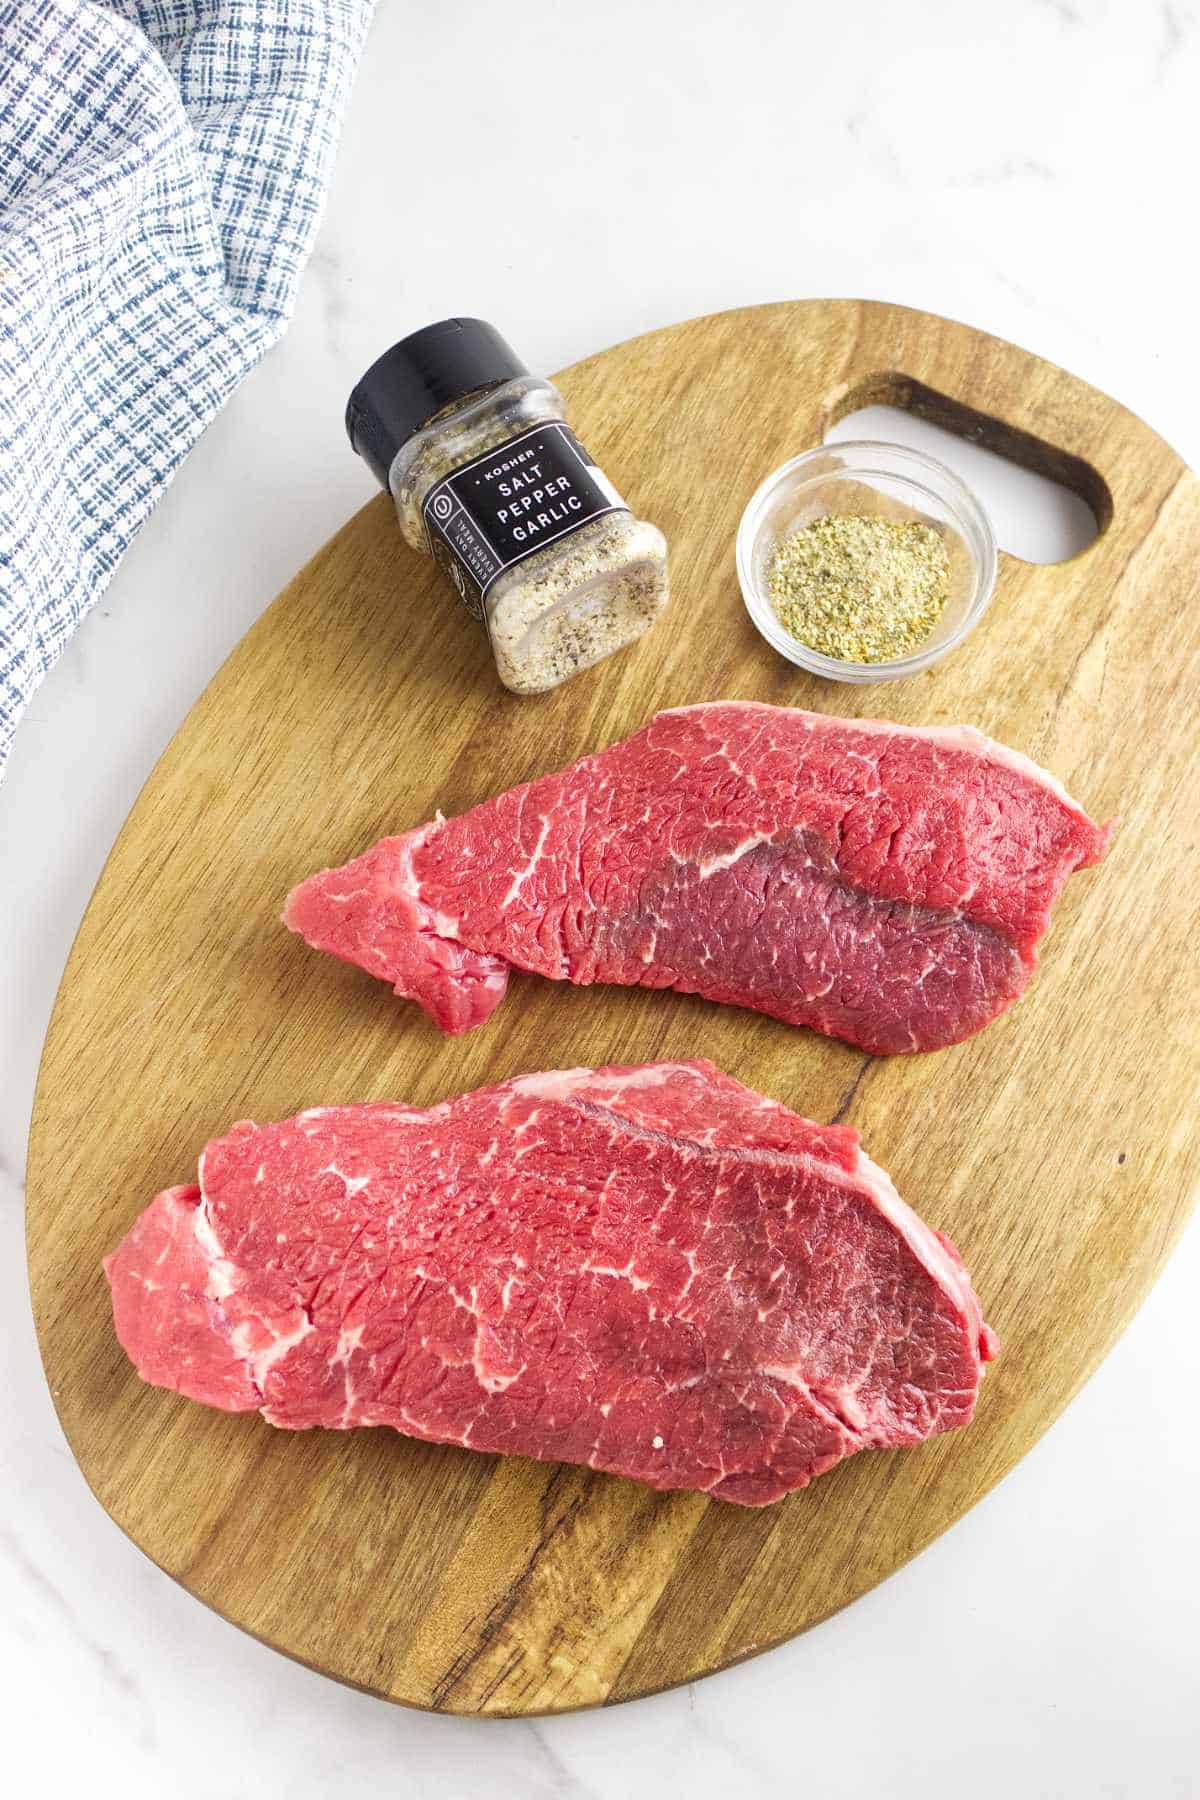 Raw Denver steaks with small bowl of seasonings on a cutting board.